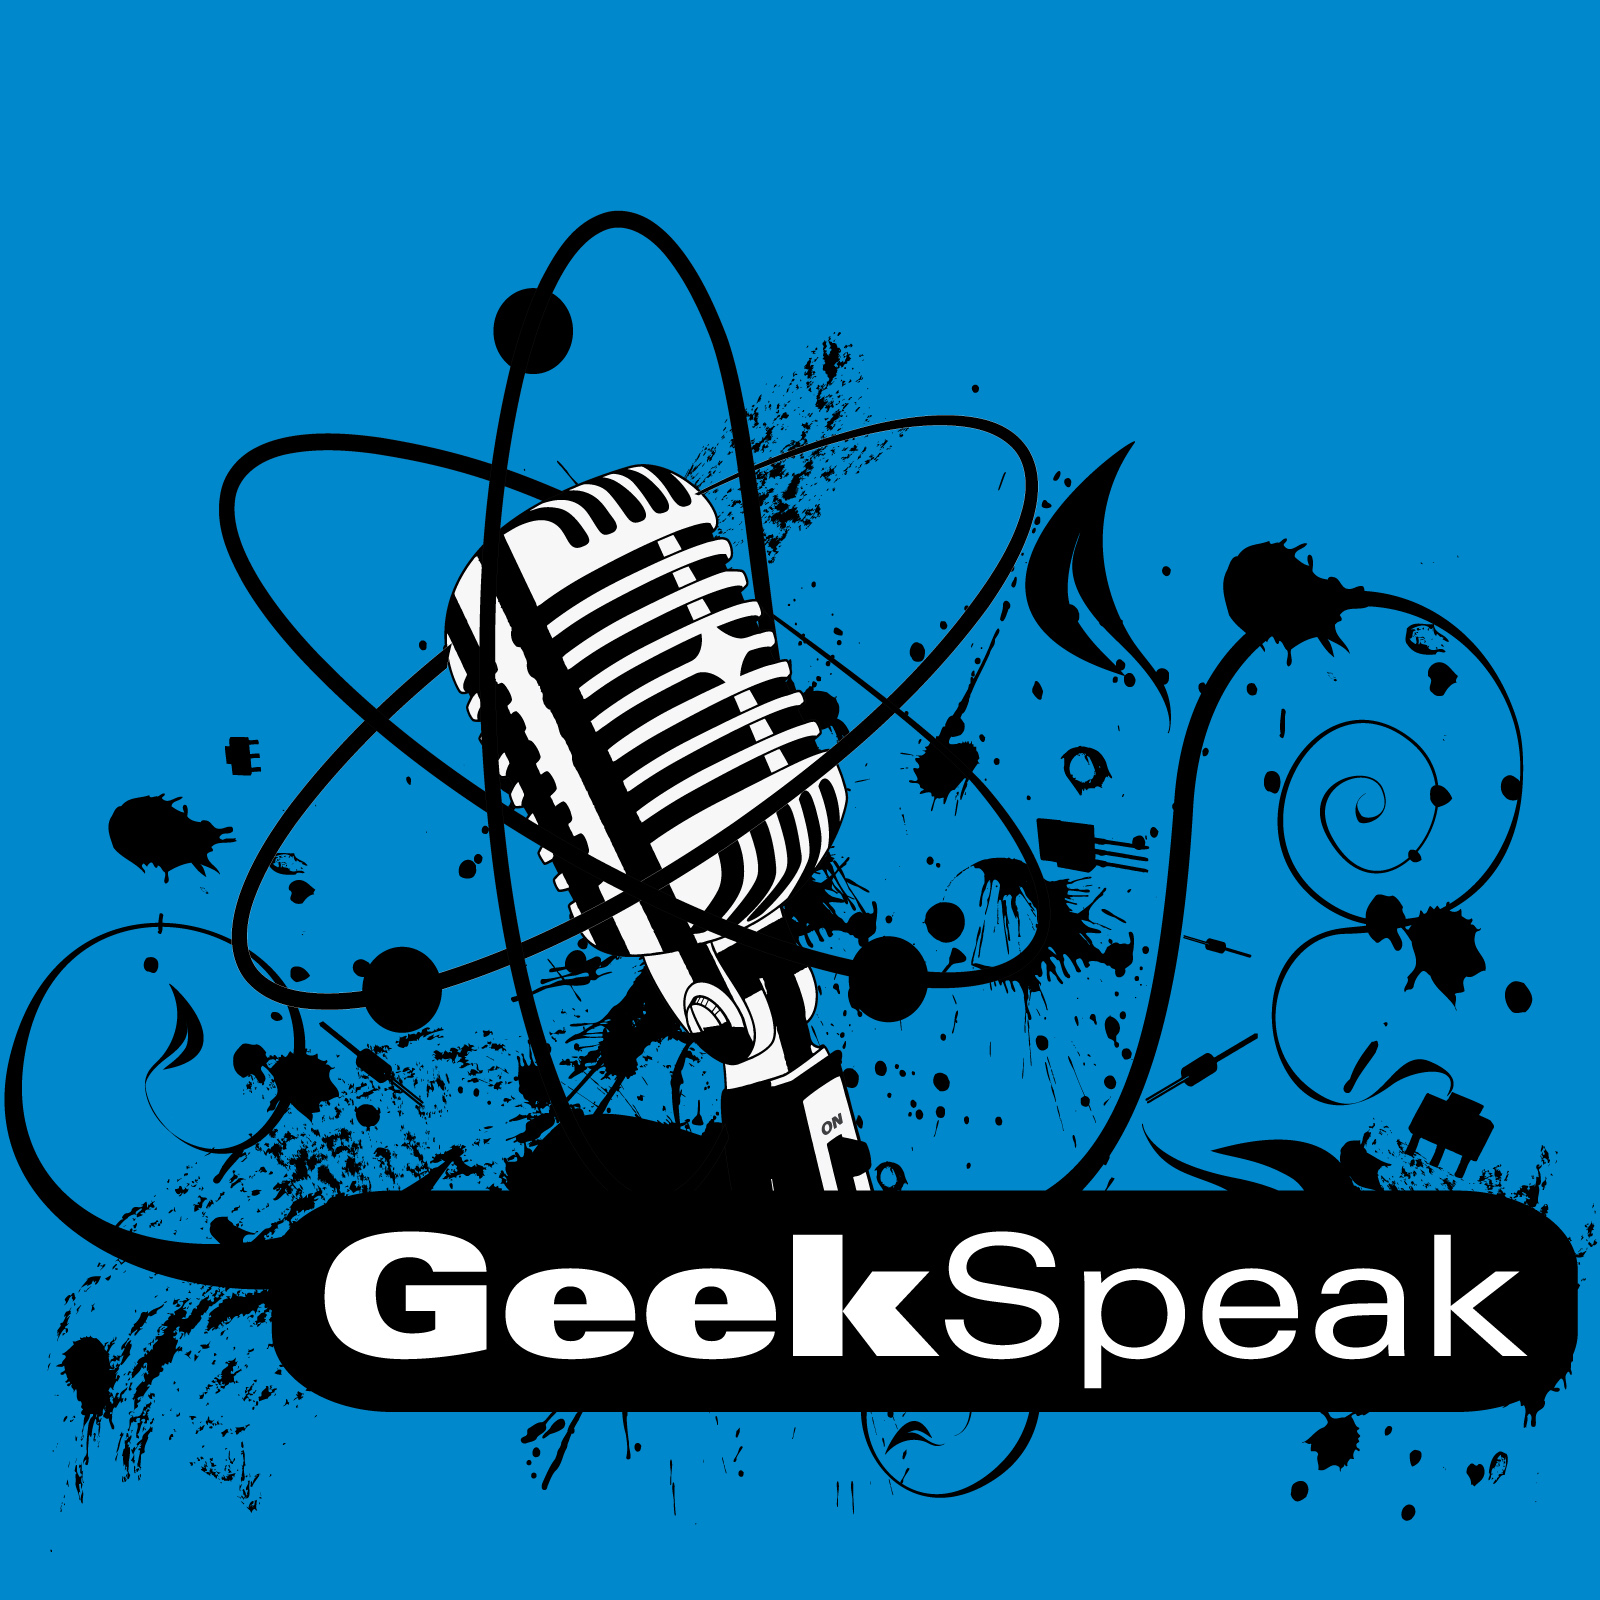 GeekSpeak Live and Community Event